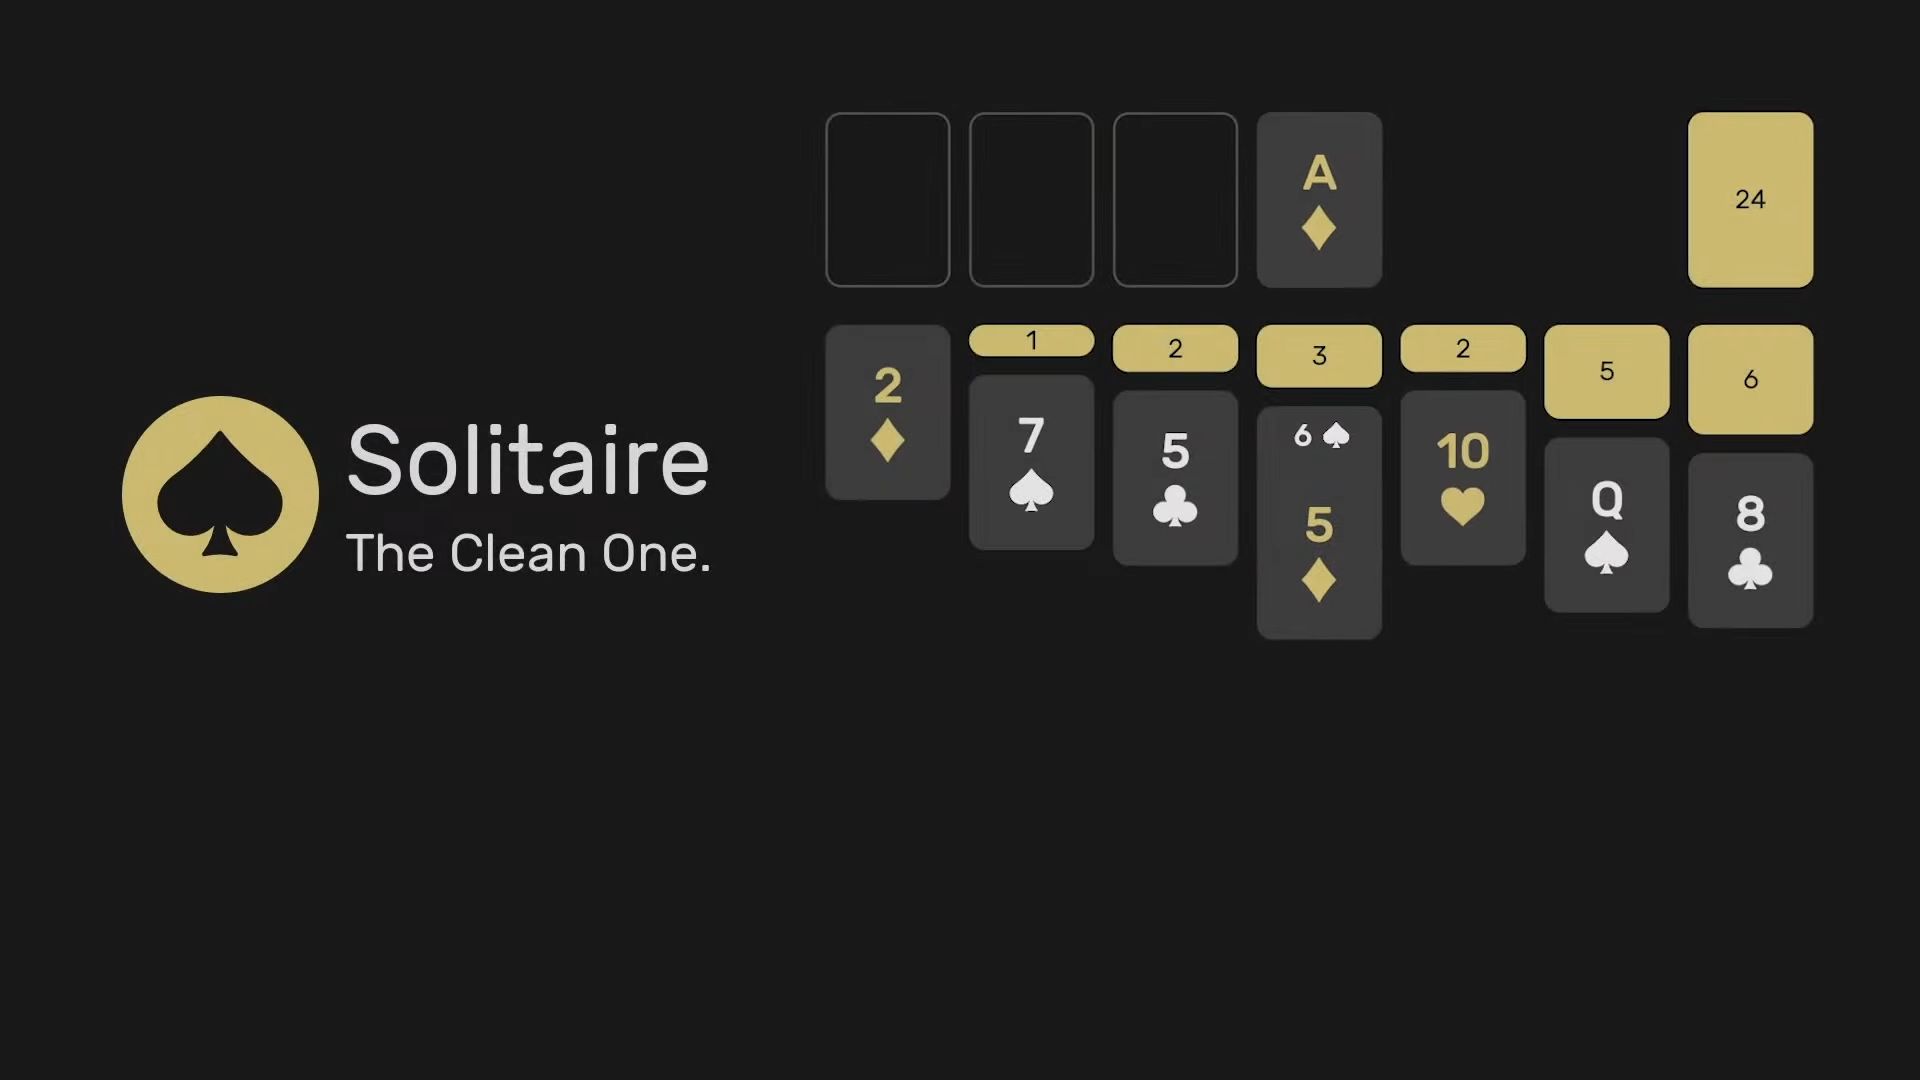 Download Solitaire - The Clean One Android free game.